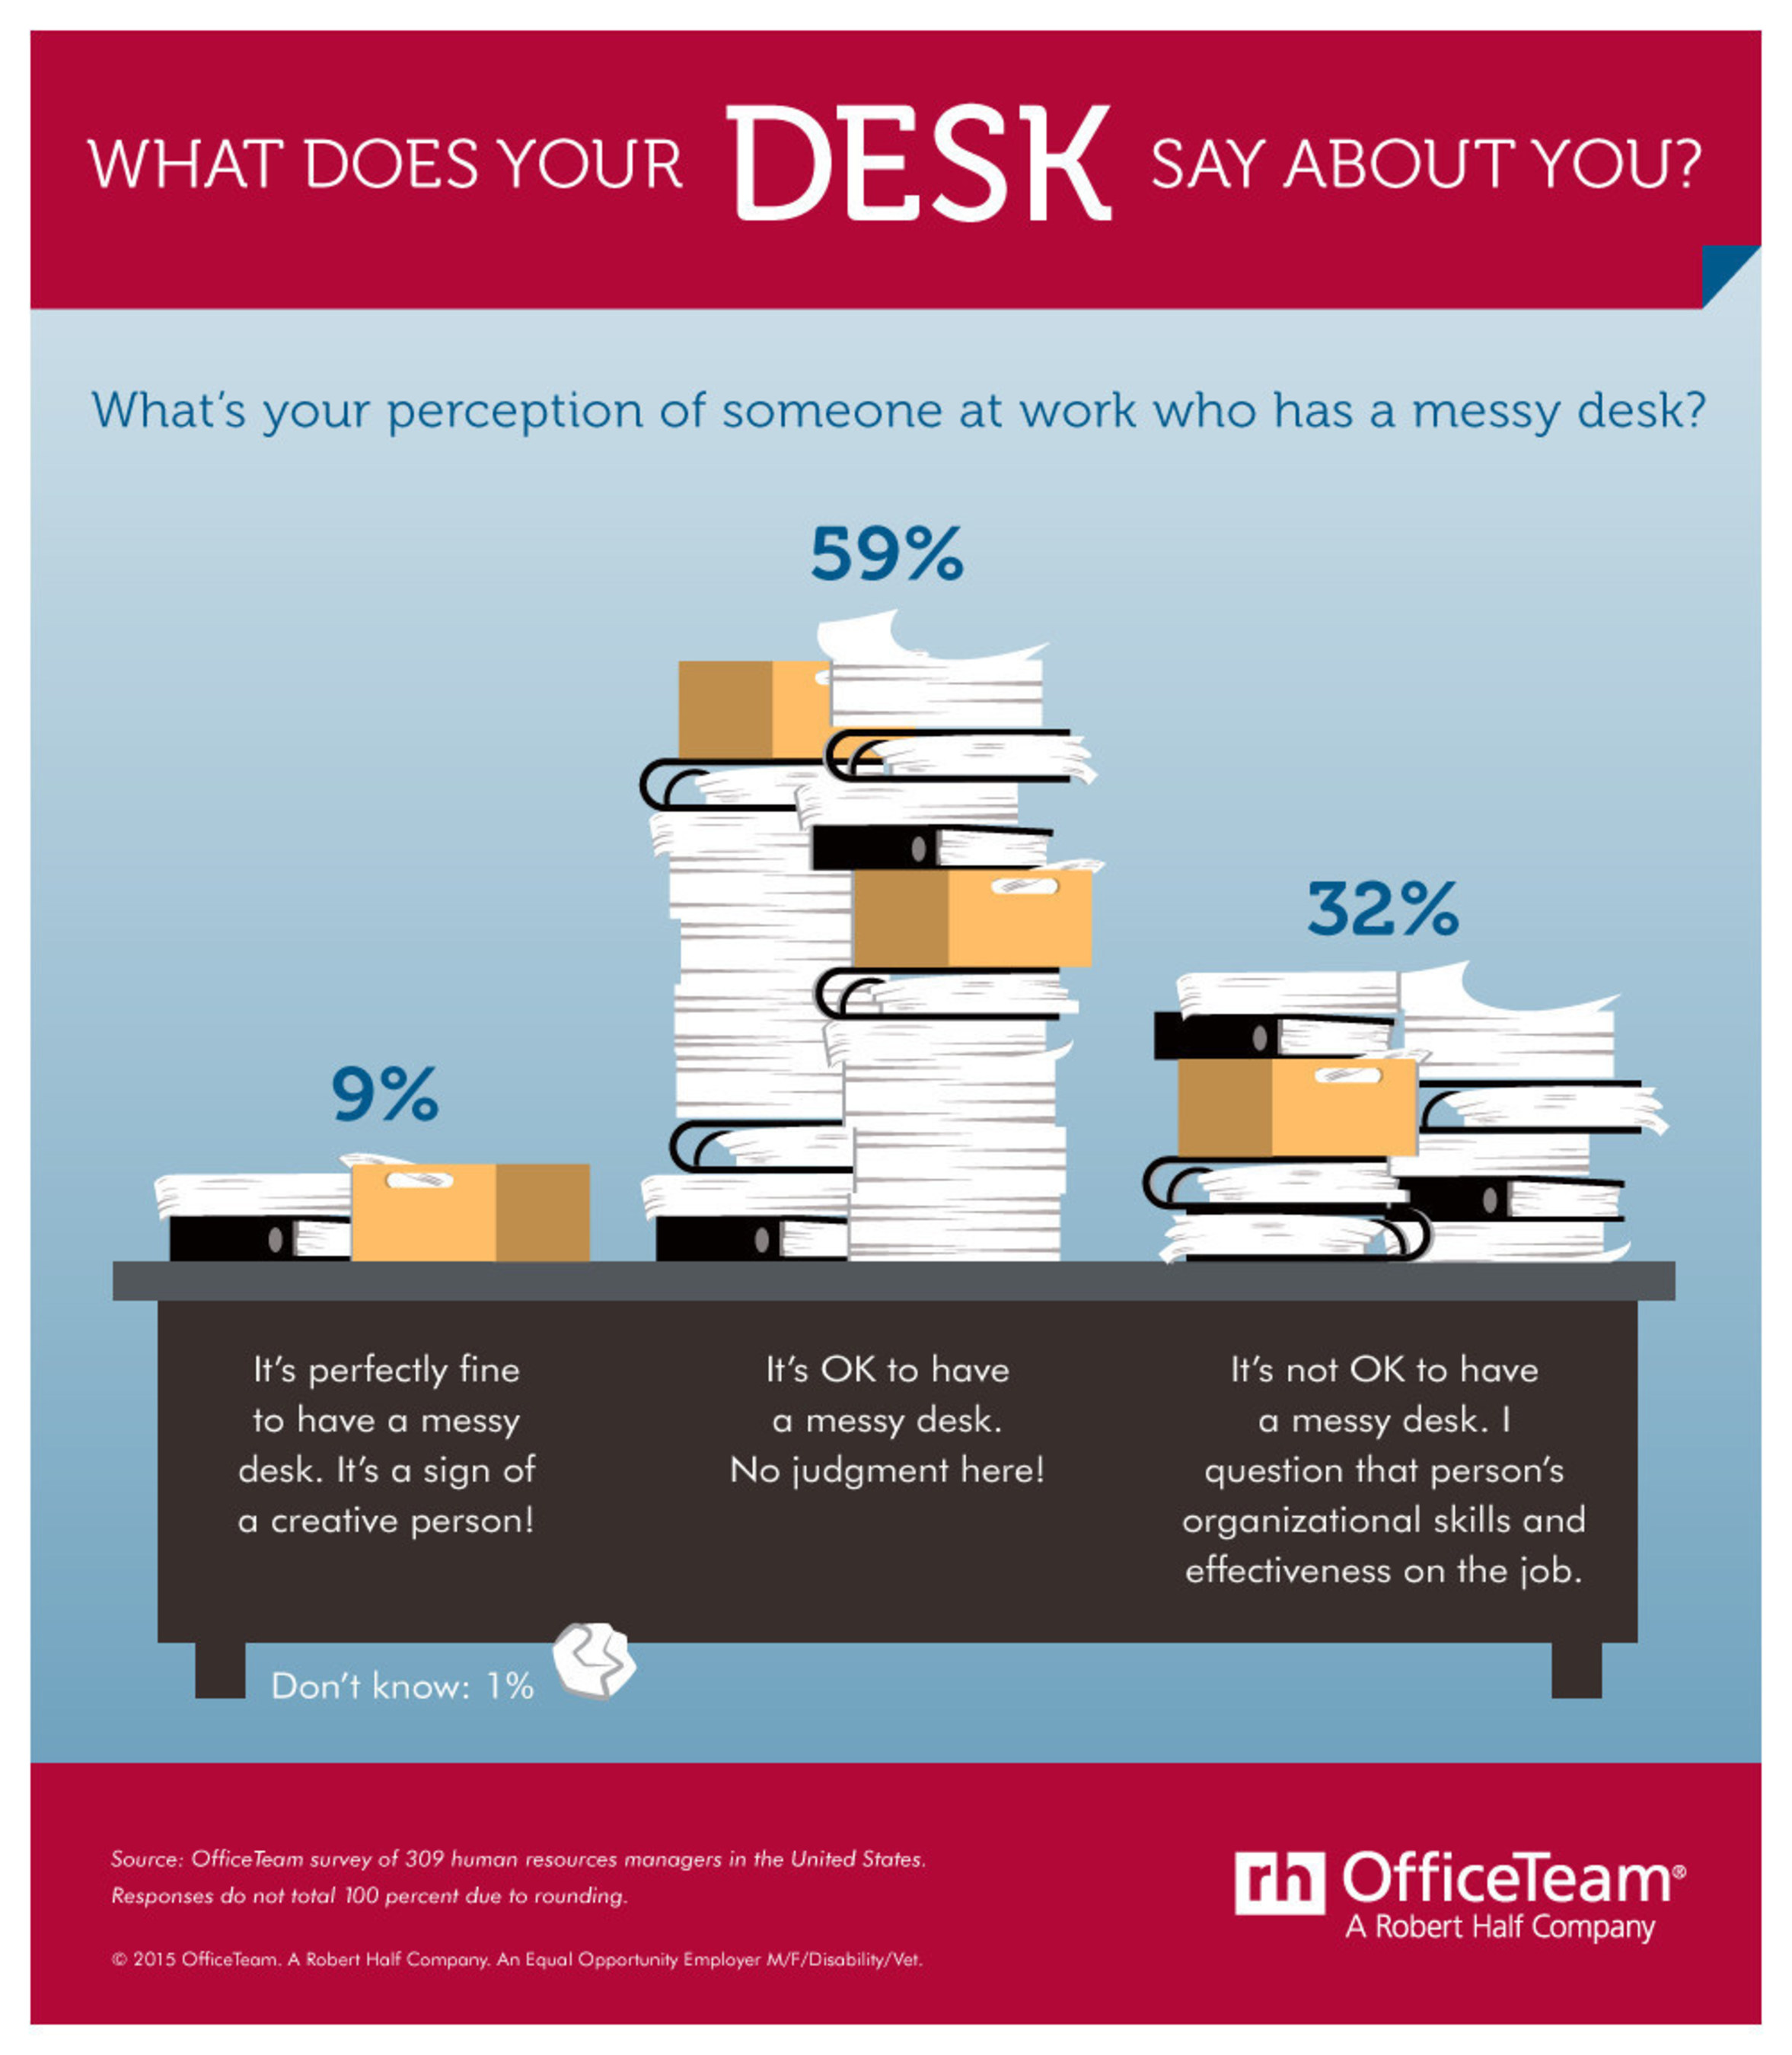 Nearly two-thirds (68 percent) of HR managers felt it's at least somewhat acceptable to have a messy desk at work. In fact, 9 percent even said it's a sign of a creative person. However, nearly one-third (32 percent) stated they would question an employee's organizational skills and effectiveness if that person had an unkempt workspace.